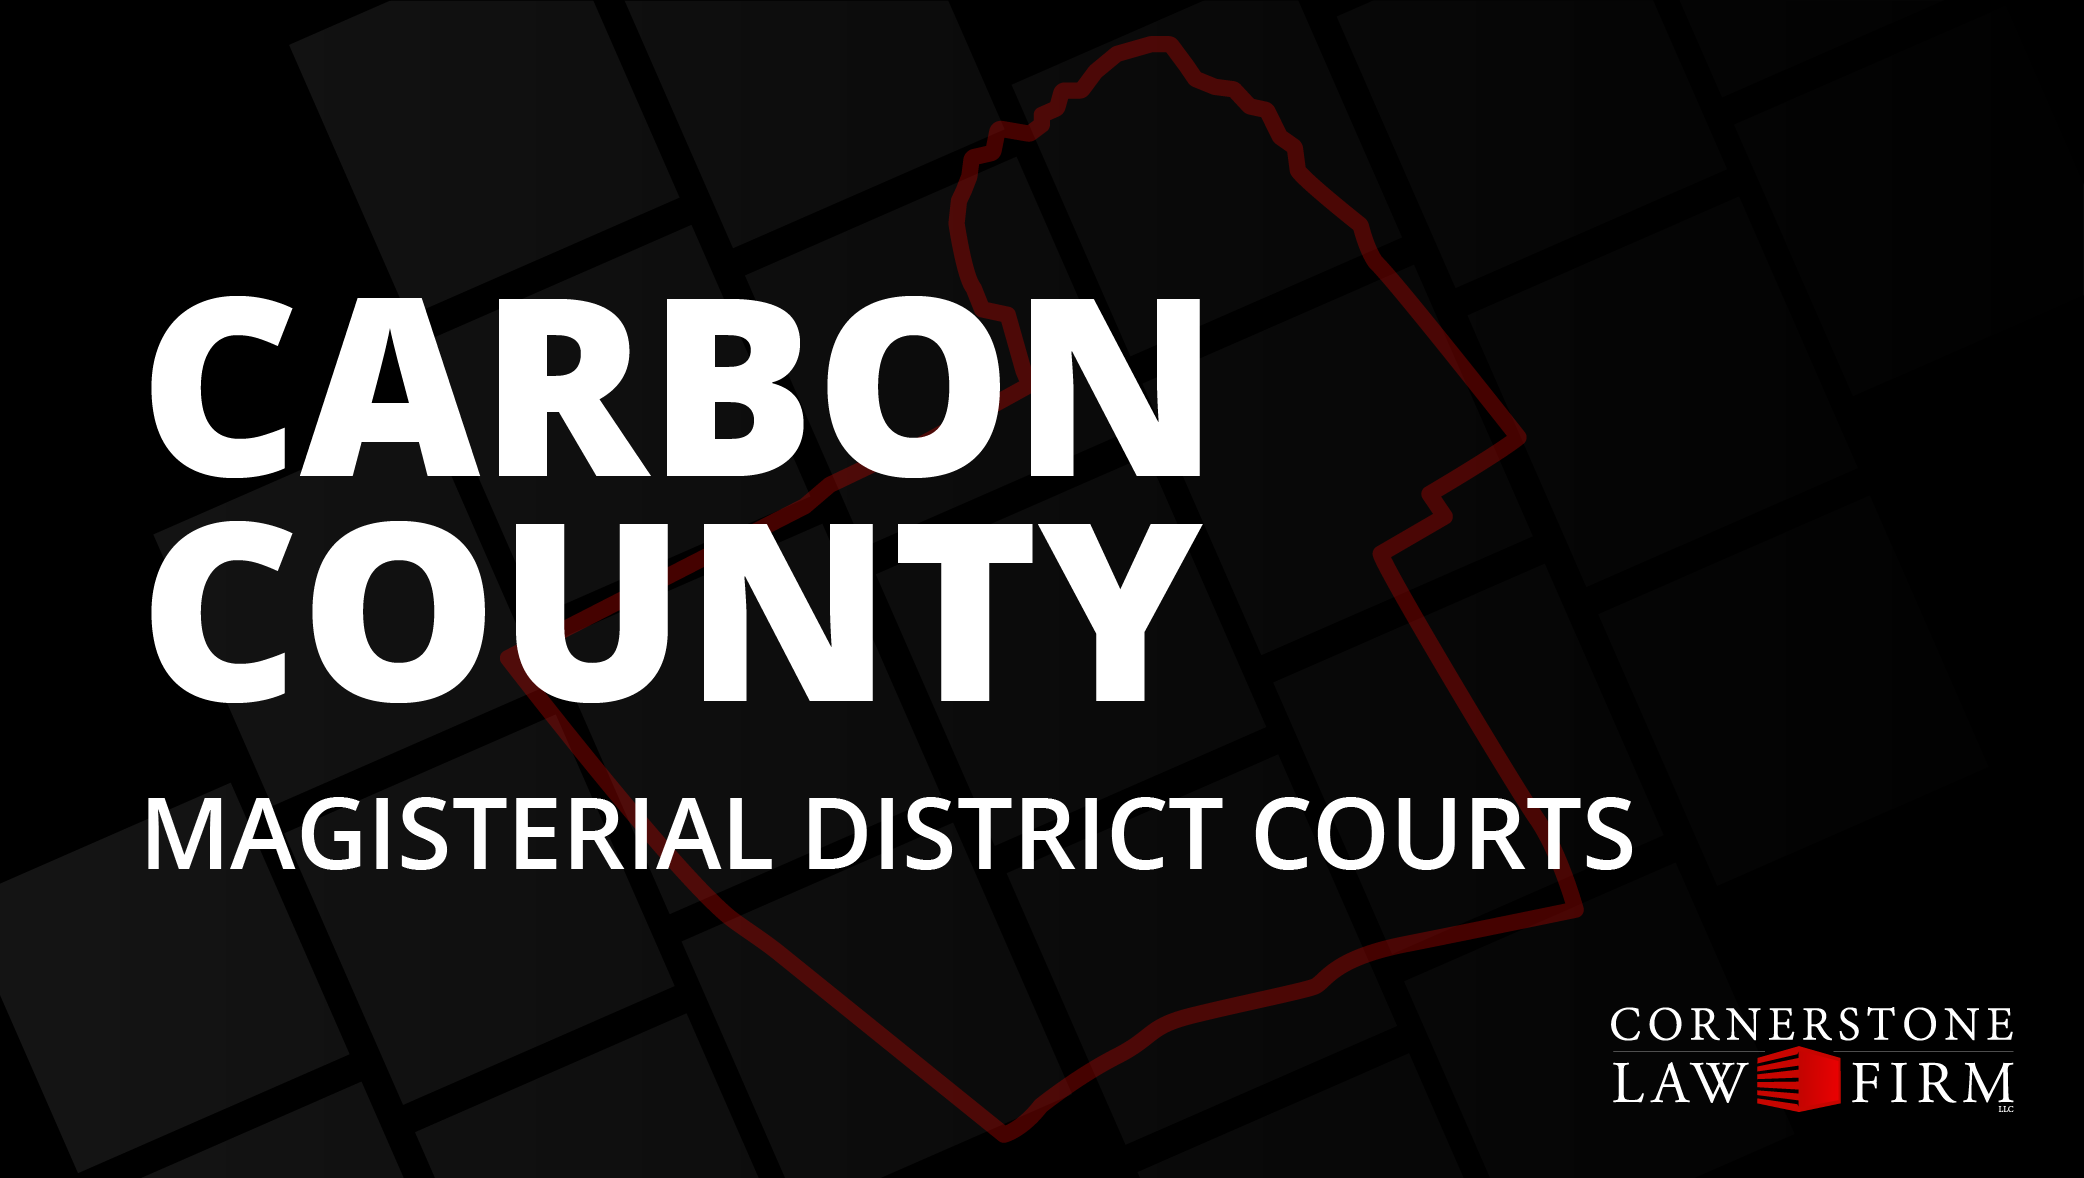 The words "Carbon County Magisterial District Courts" over a black background with a faded red outline of the county.